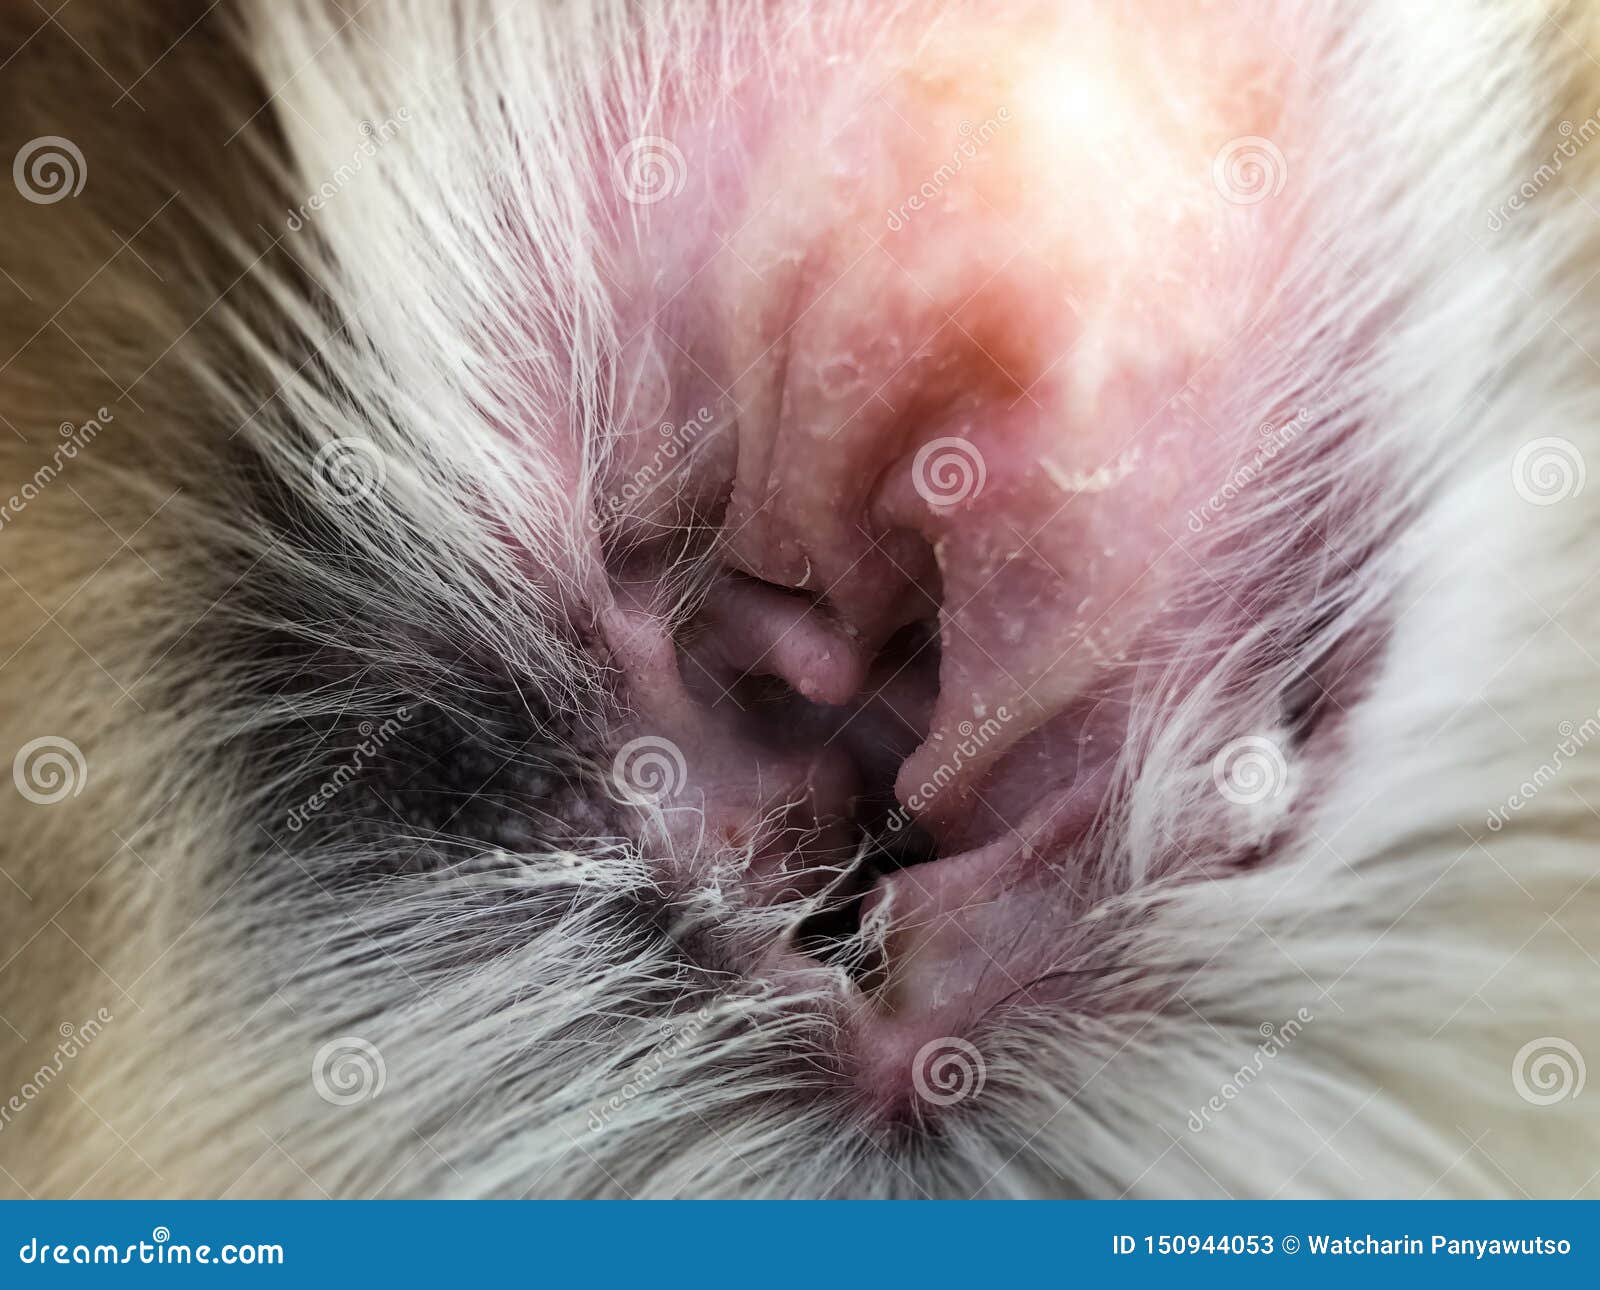 Closeup Dog Ear Problemshow The Secondary Skin Infections In Dogs With